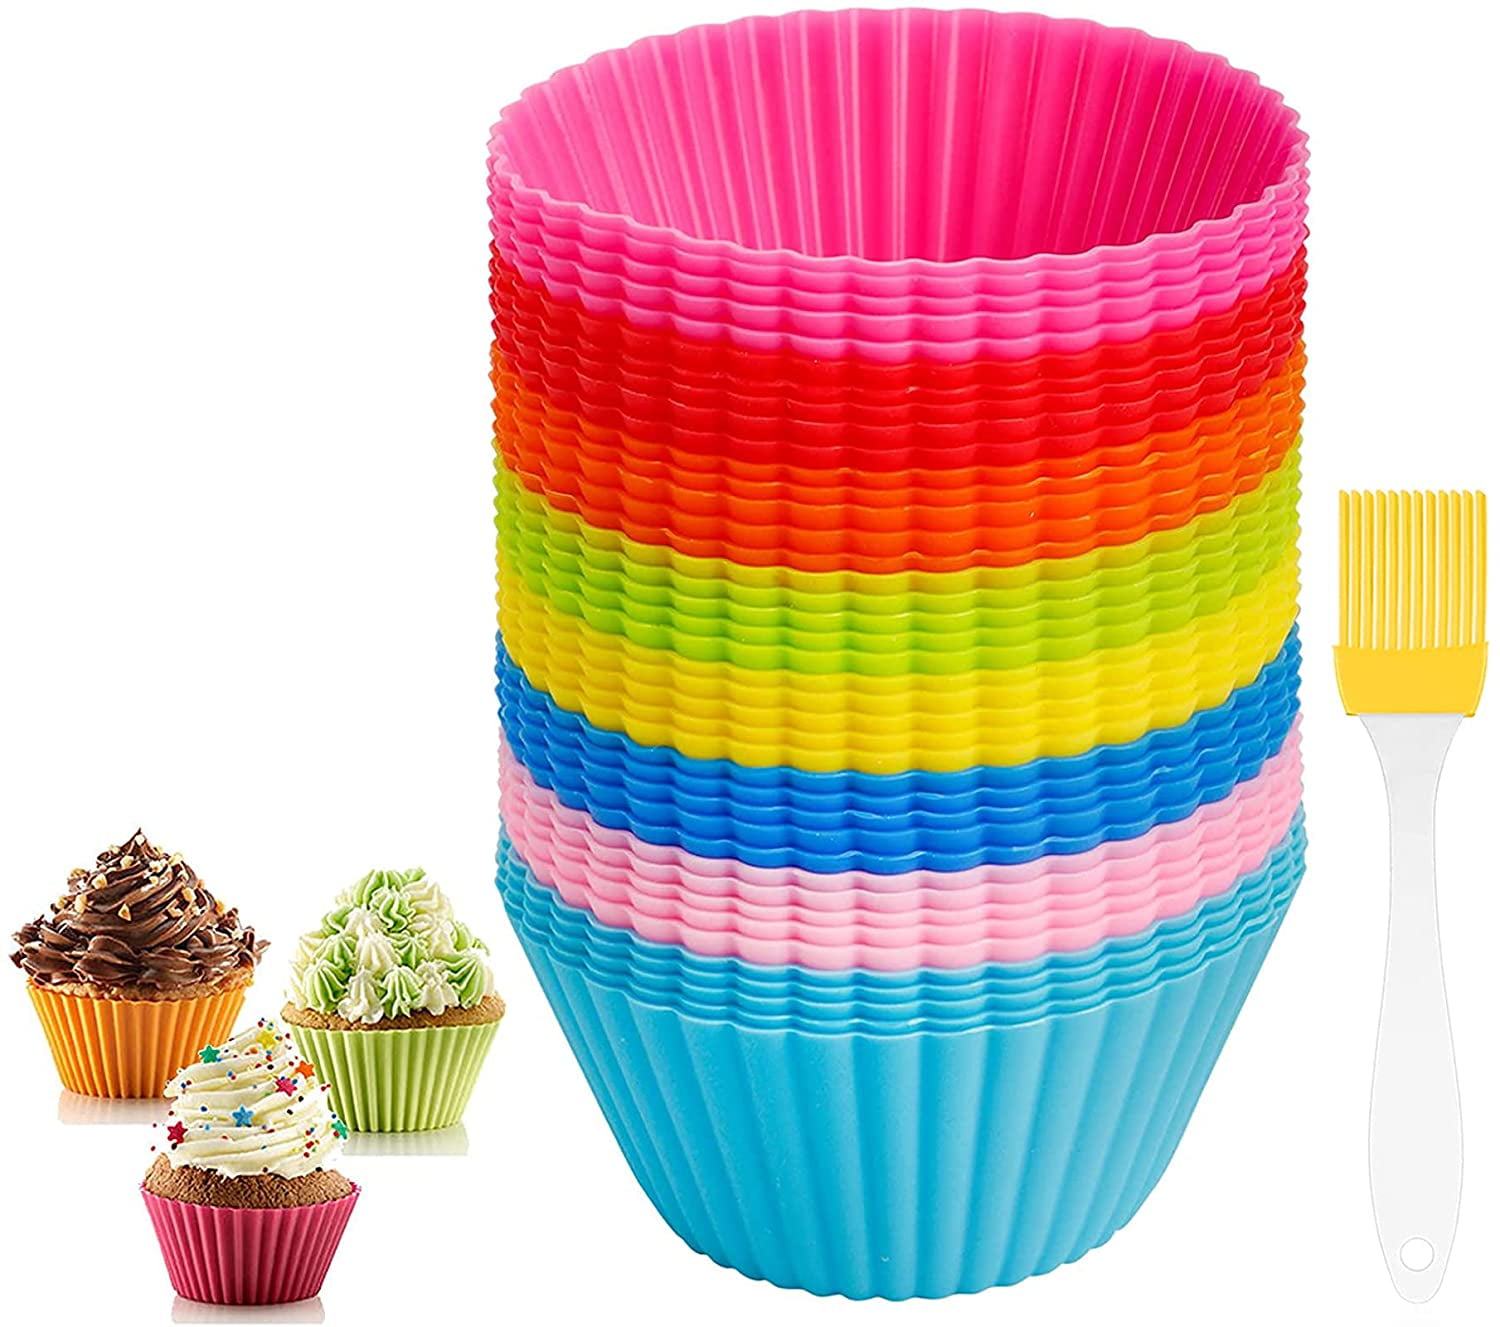 AIFUDA Reusable Mini Cake Cups Liners Mold Nonstick Muffin Donut Pan 36 Pcs Silicone Cupcake Baking Cups 9 Shapes 